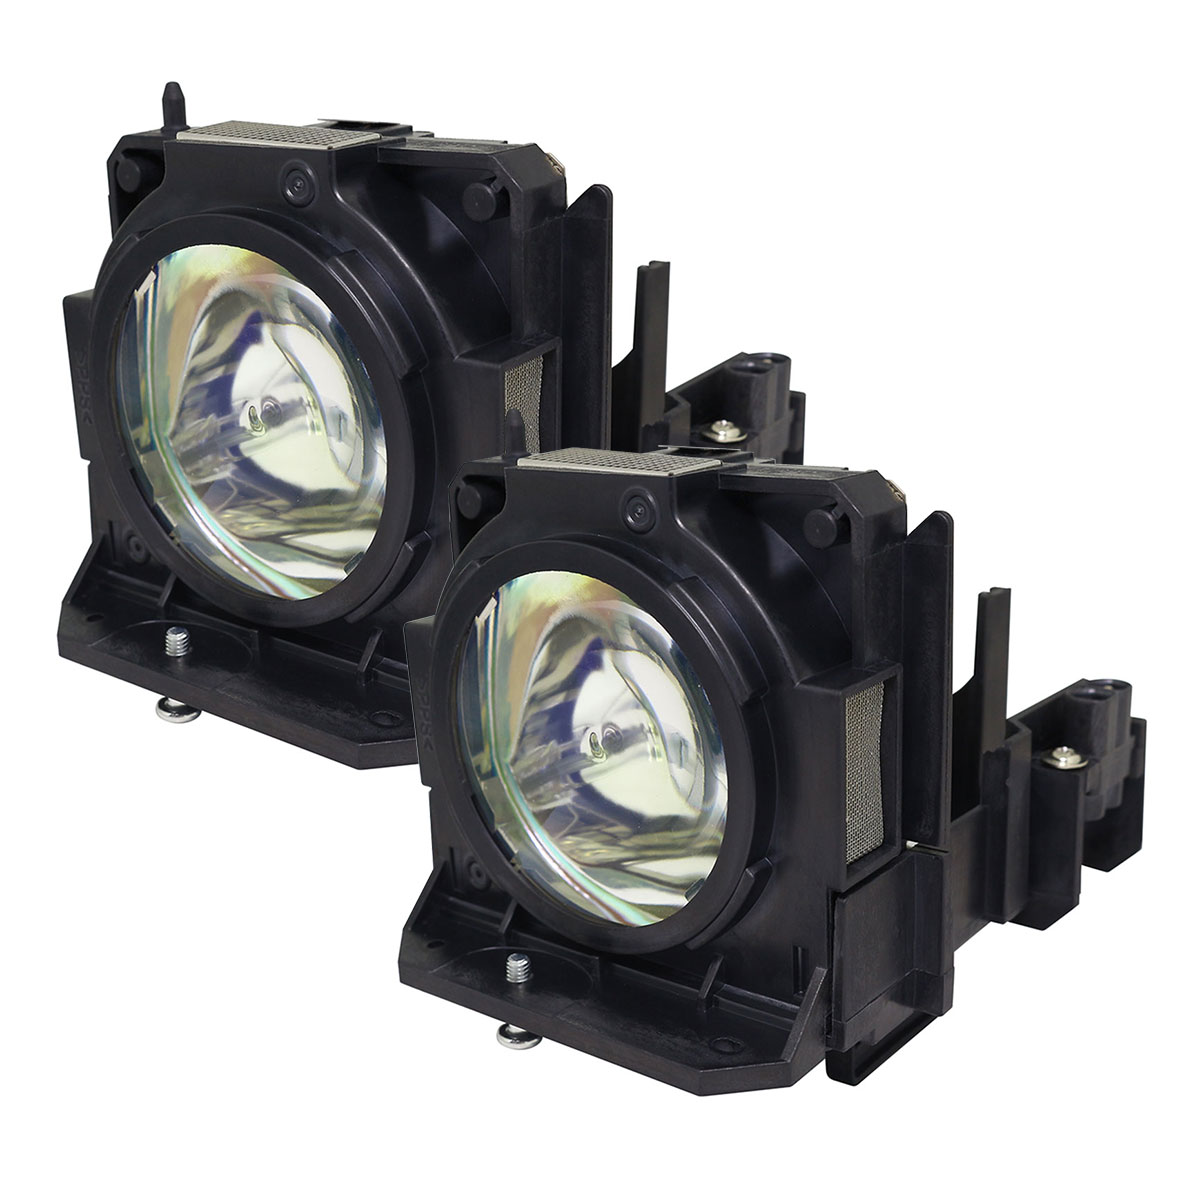 OEM ET-LAD70AW Lamp & Housing Twinpack for Panasonic Projectors - 1 Year Jaspertronics Full Support Warranty! - image 3 of 9